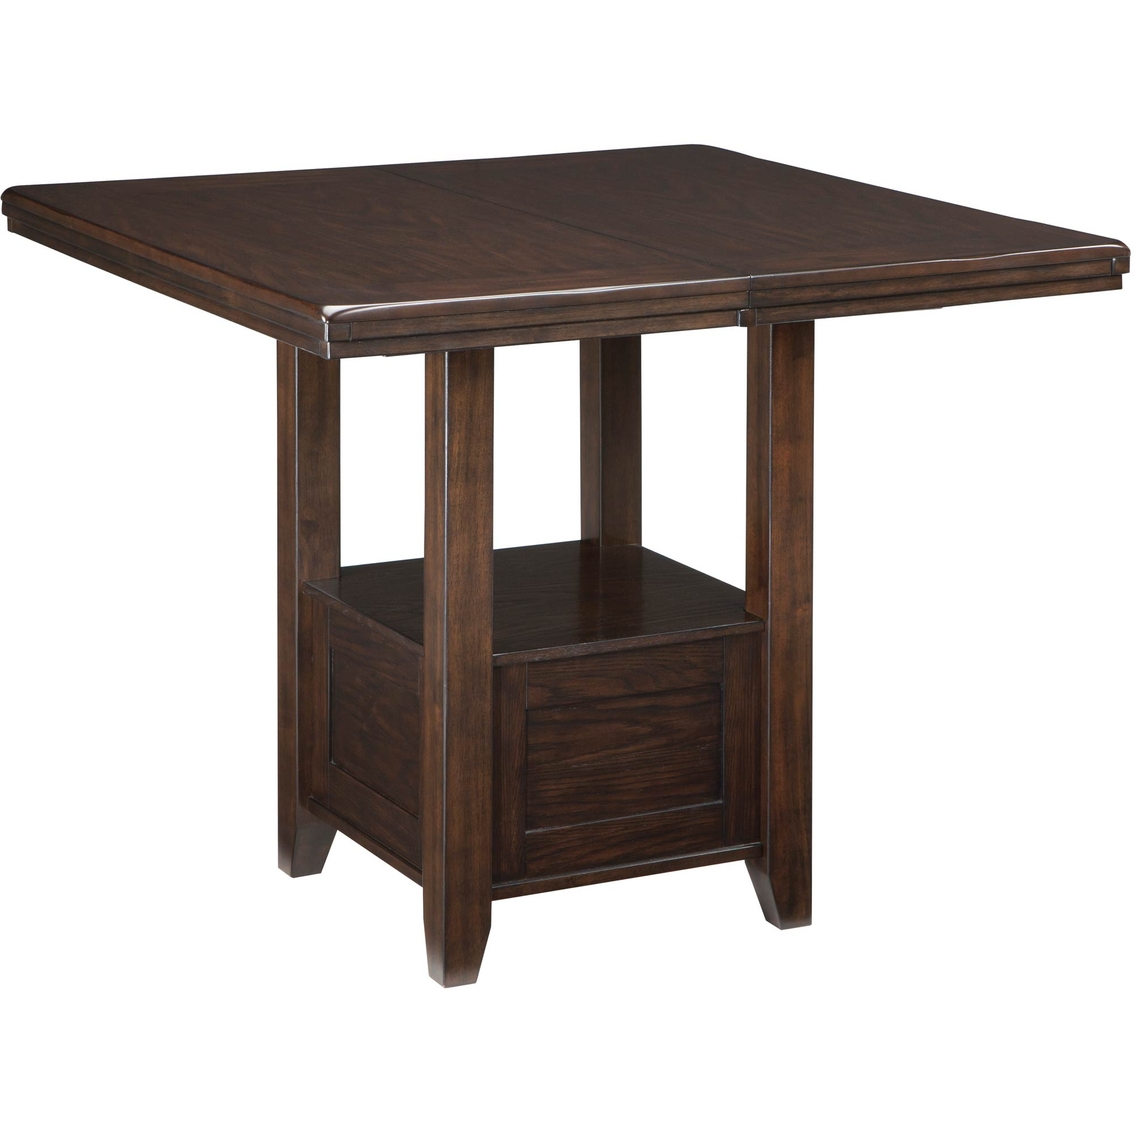 Ashley Haddigan Counter Height Dining Table - Image 2 of 4